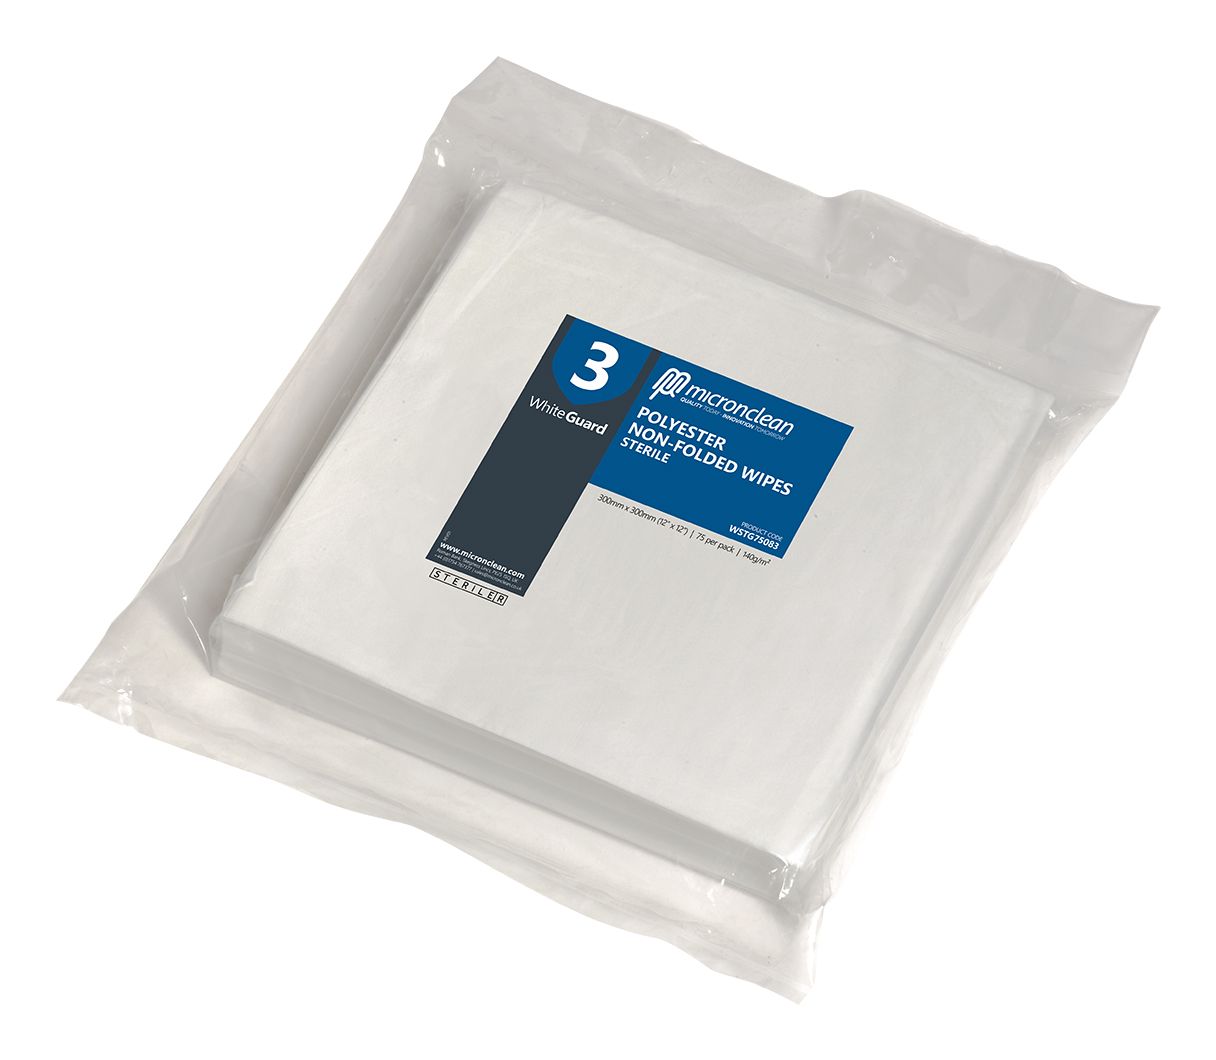 WhiteGuard 3 Laundered Polyester Wipes Non-Sterile [IN]